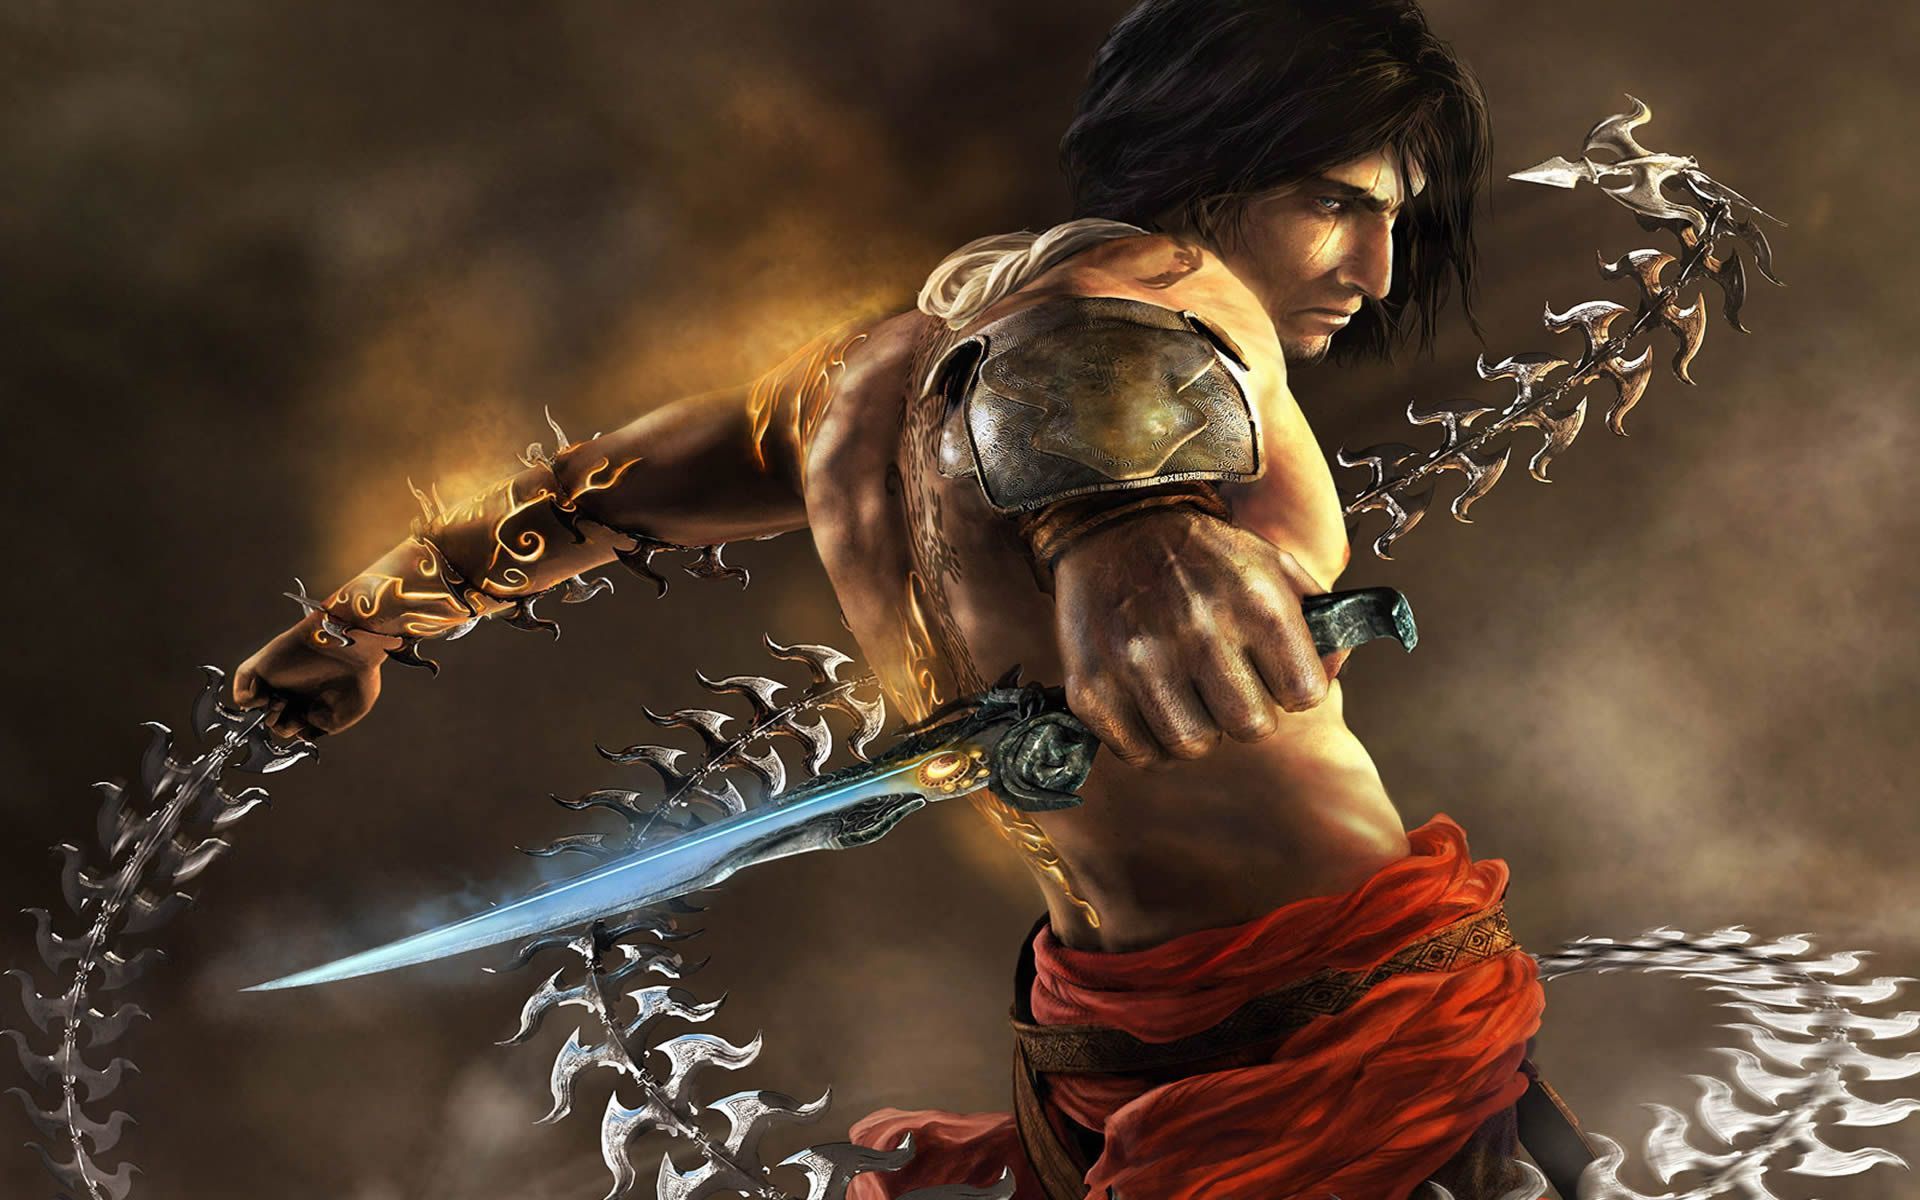 Prince Of Persia with dagger and chain whip. Prince of persia, Persia, Warrior within